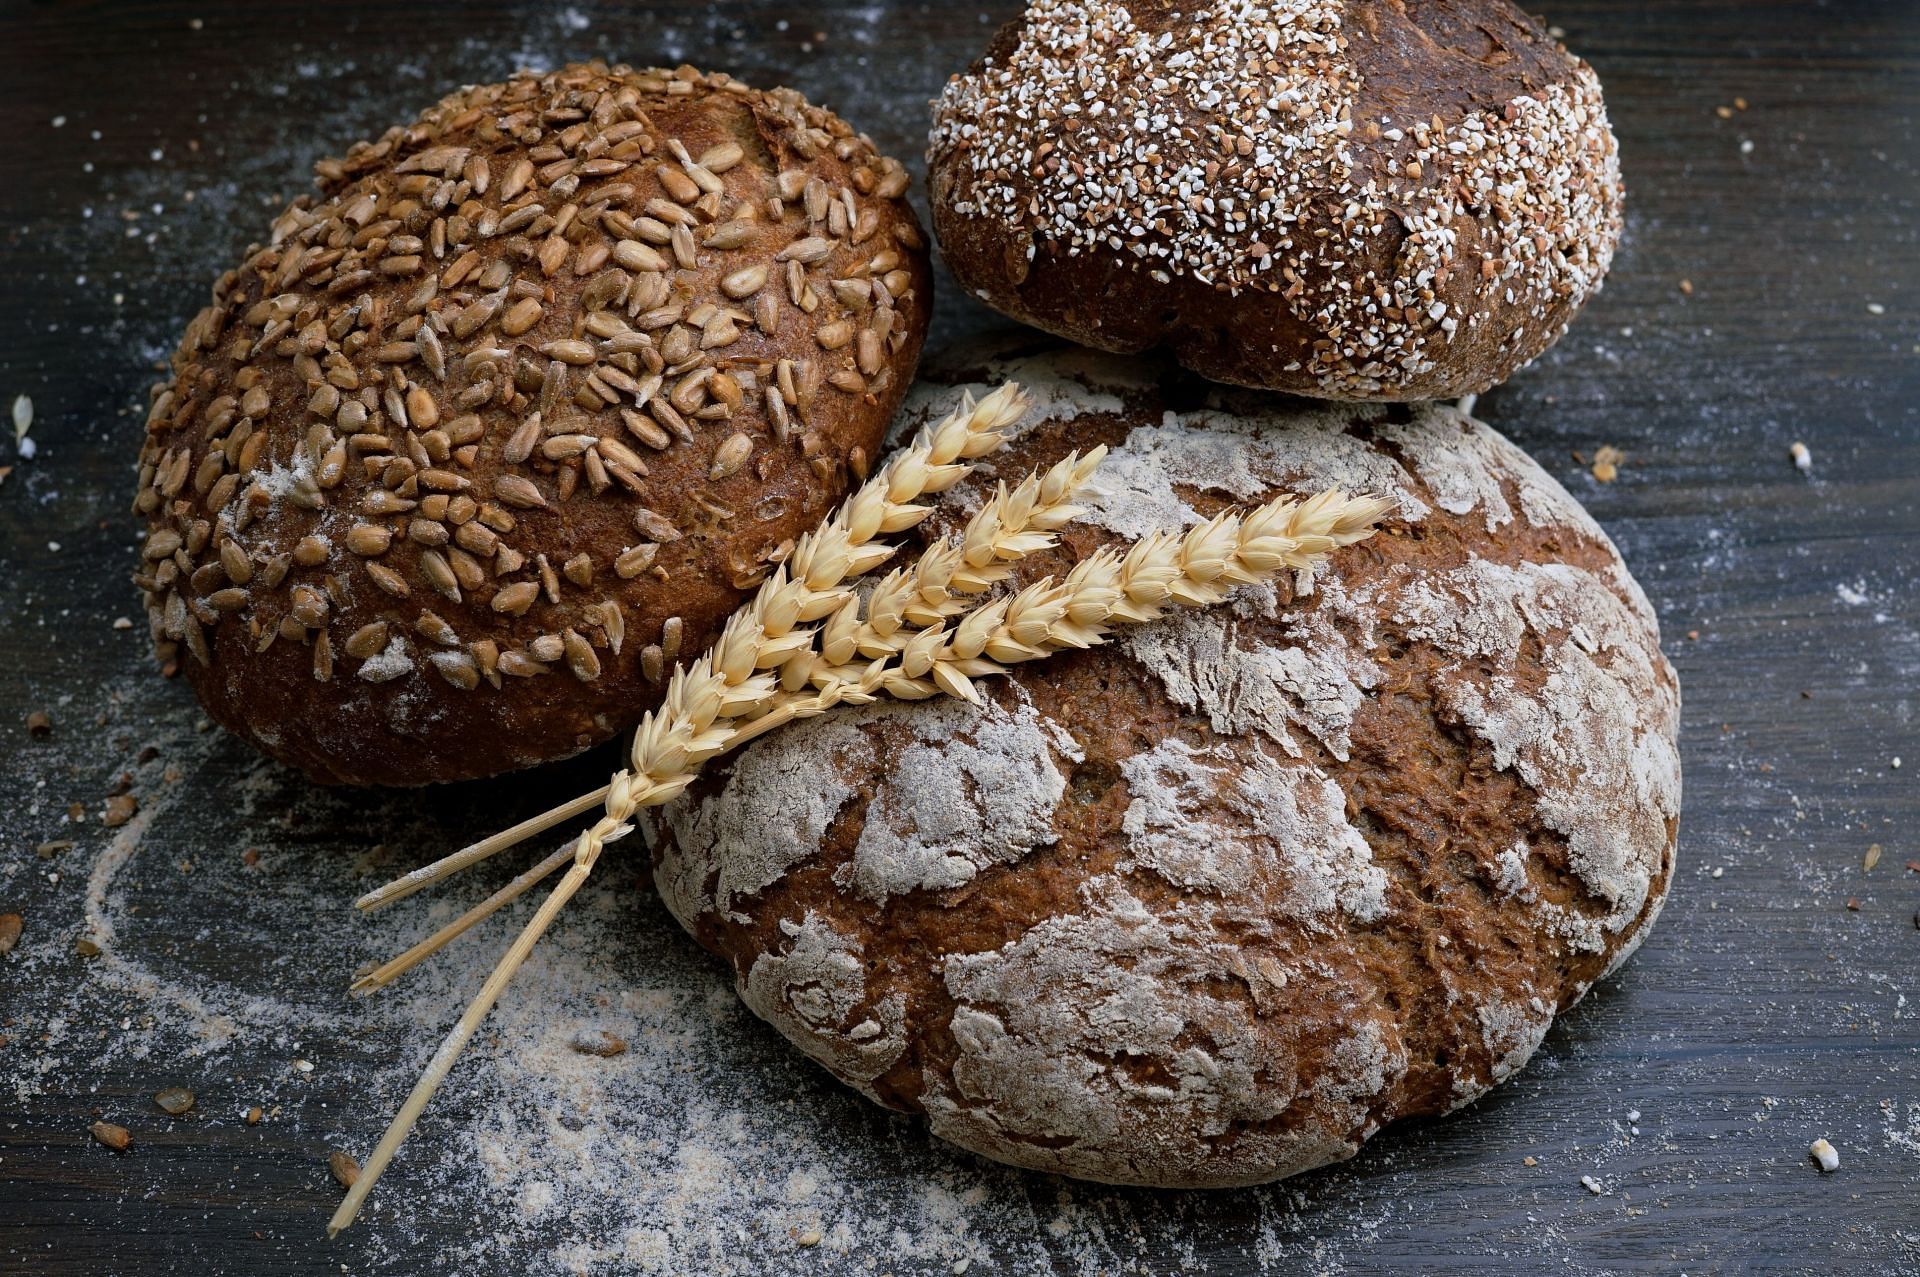 Gluten-rich foods are among the common causes of constipation. (Image via Unsplash/Wesual Click)